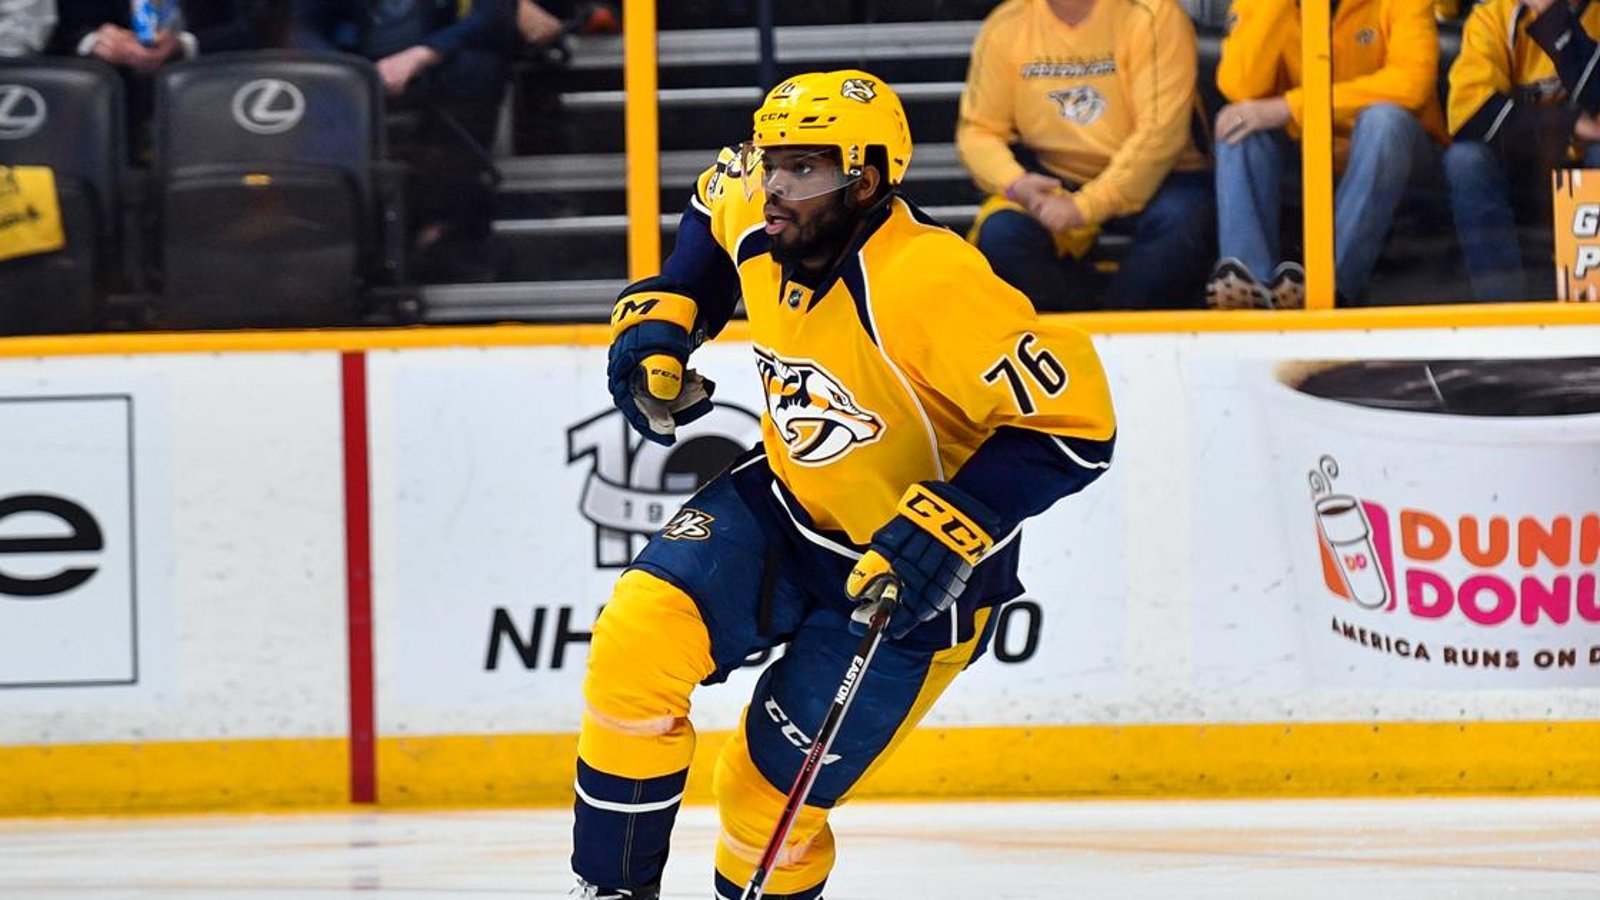 Subban stole the show again today! 